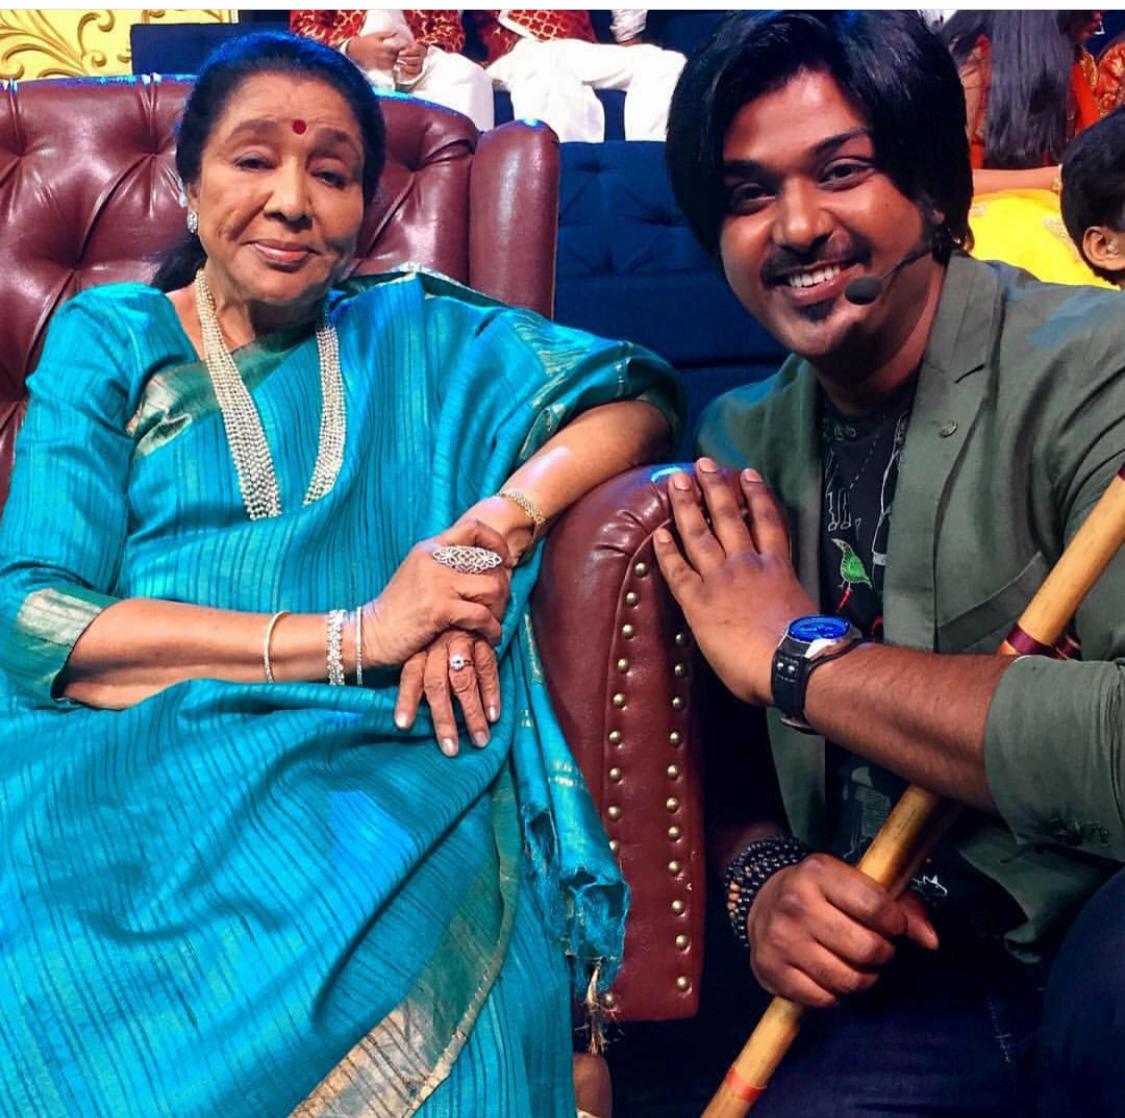 *Caption*- Flautist Paras Nath shares a #throwback picture of Asha Bhosle, calls her voice powerhouse of hope, positivity and happiness “I don’t think, as a musician I am qualified to praise her but as a fan, she is pure gold. She is India’s pride and honour. Her forte has been her magnificent range and versatility - rarely has the world seen an artist excel in so many varied genres” #parasnath #flautist #flutist #flute #music #musician #ashabhosle #legend #prideofIndia *Instagram Handle* @parasnathflute @parulchawla9 @picturenkraftofficial